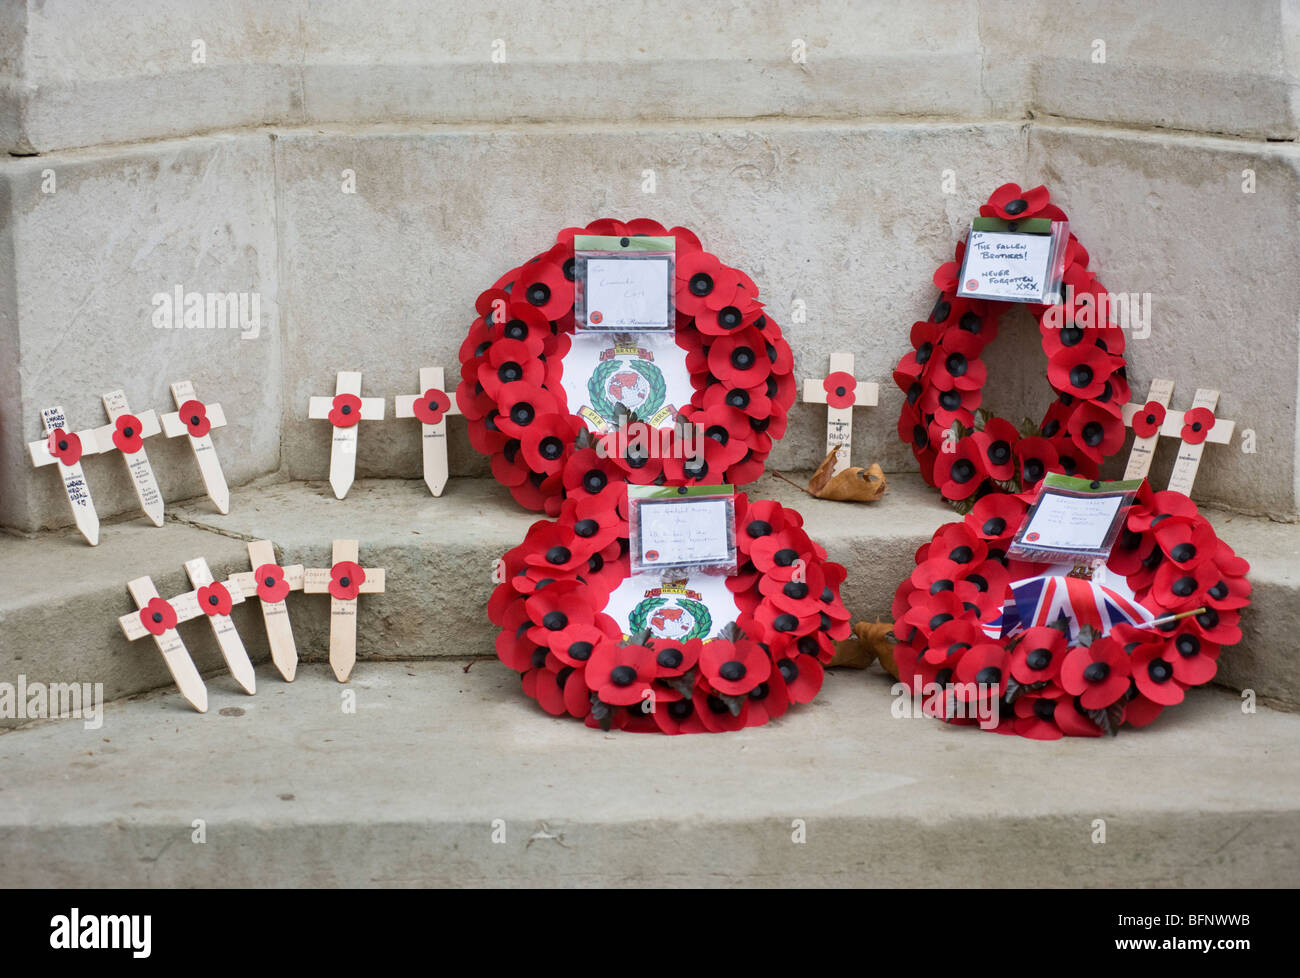 poppy wreaths and wooden crosses on stone steps Stock Photo